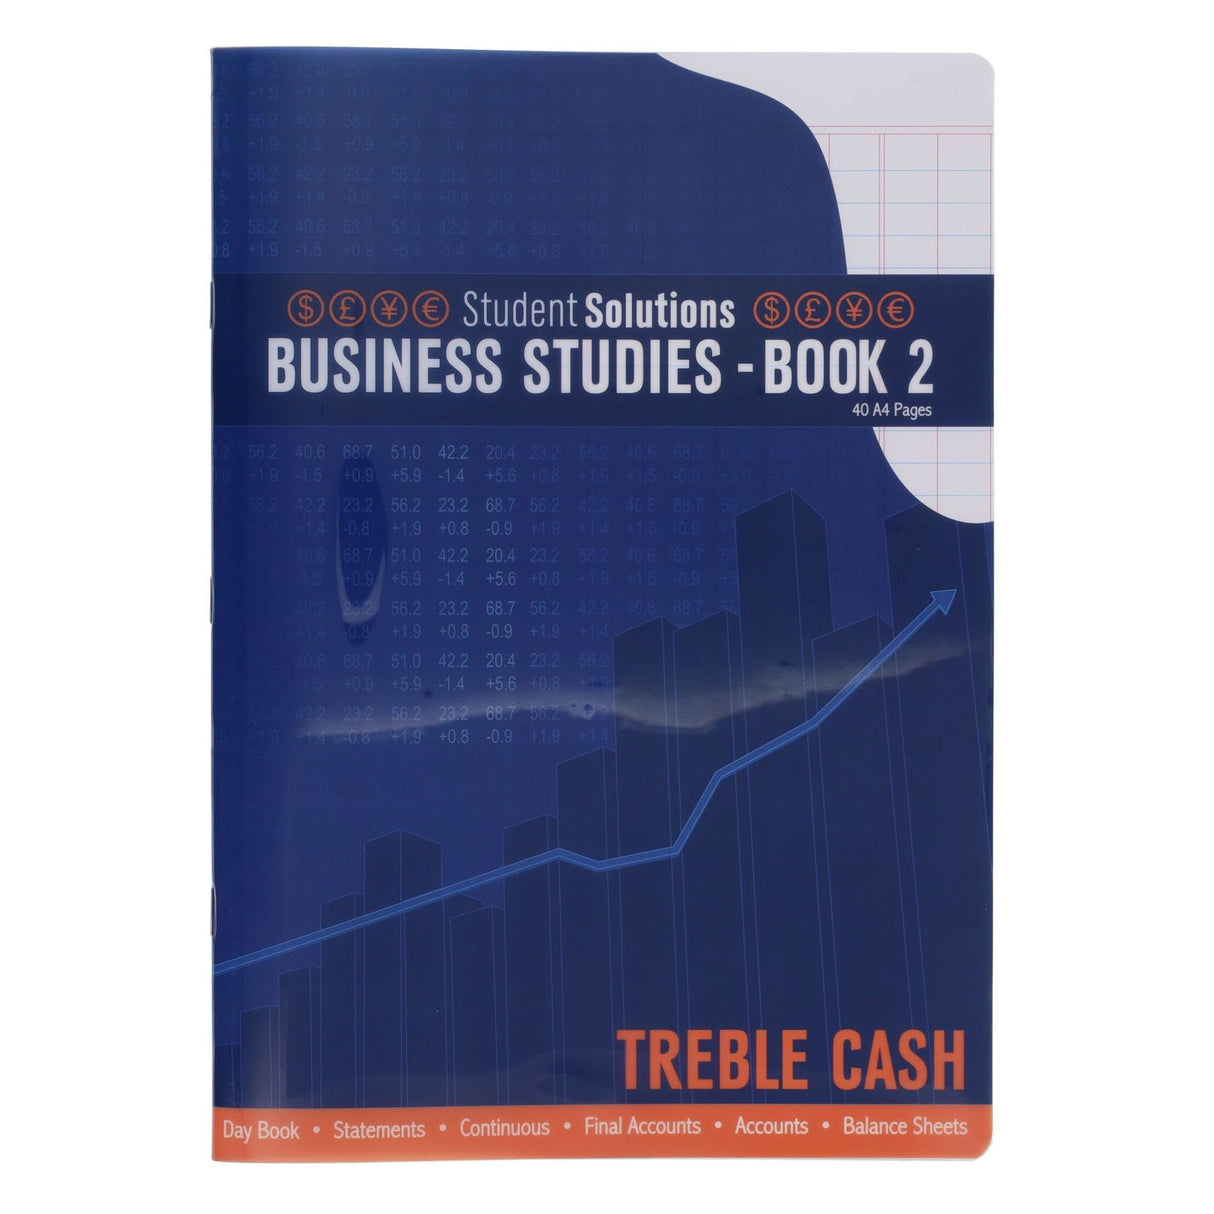 Student Solutions A4 Durable Cover Business Studies - 40 Pages - Book 2 | Stationery Shop UK